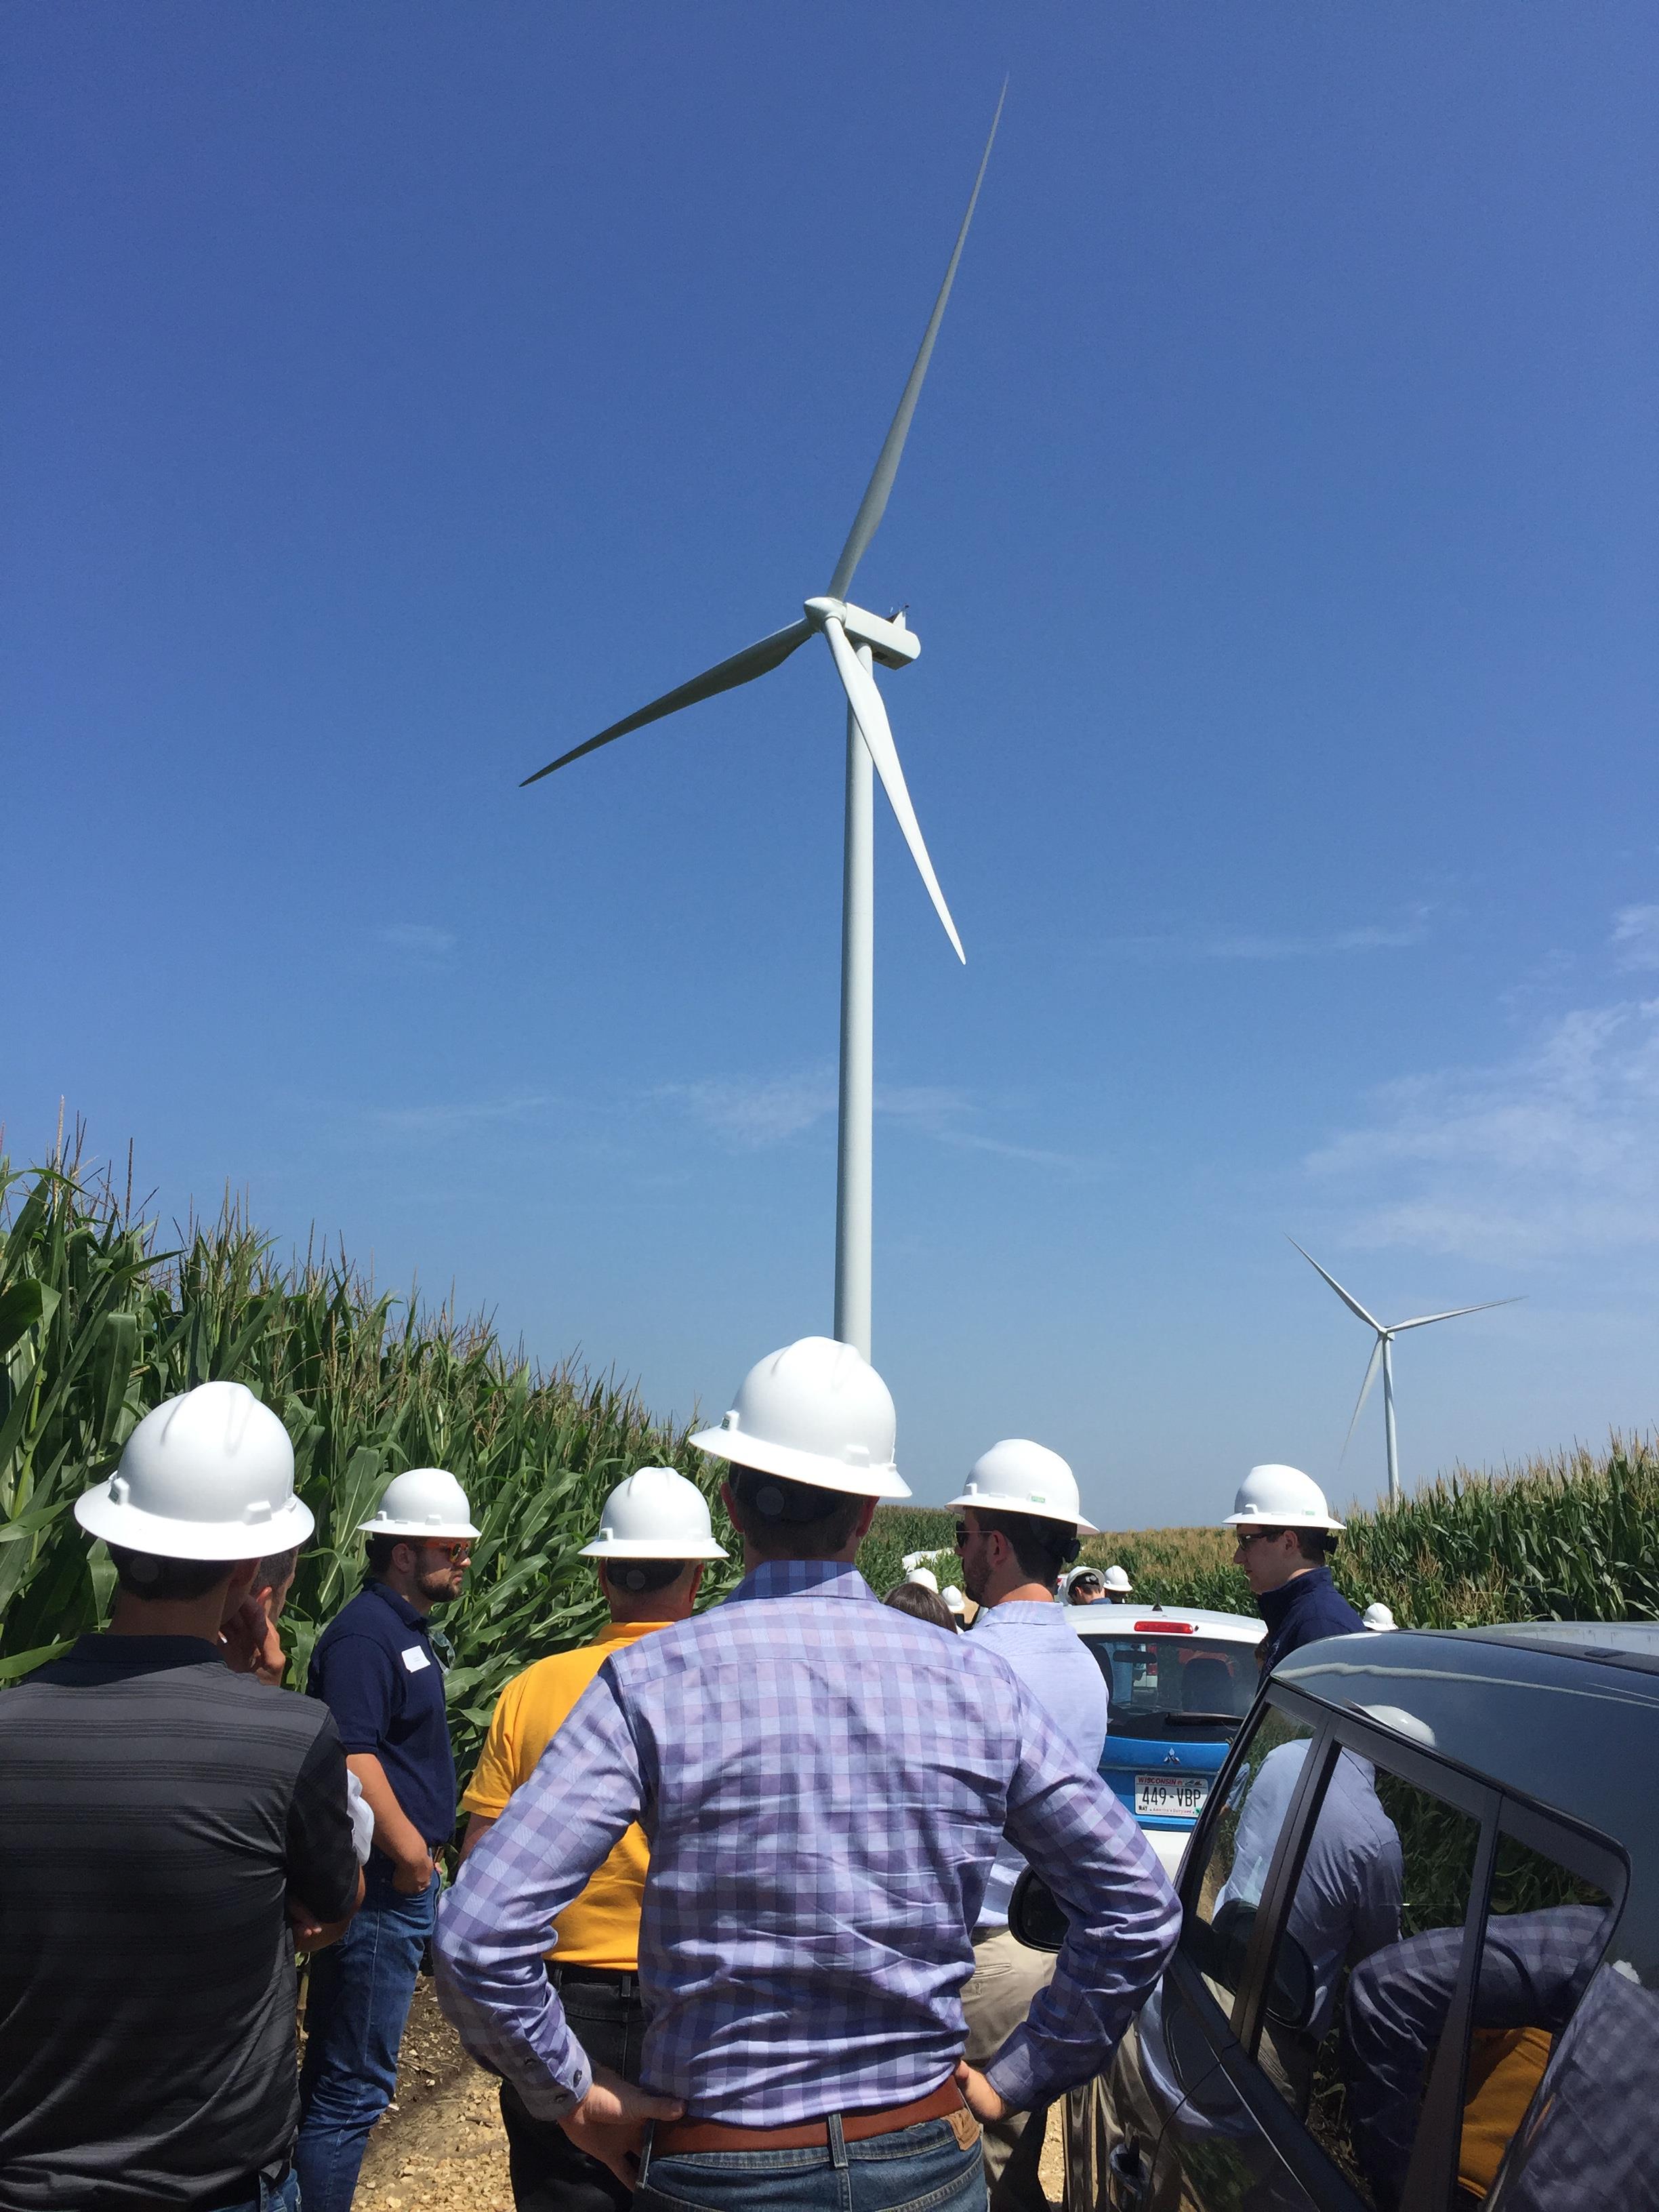 Regulators approve $162M wind farm purchase; first project approved under 2010 siting rule